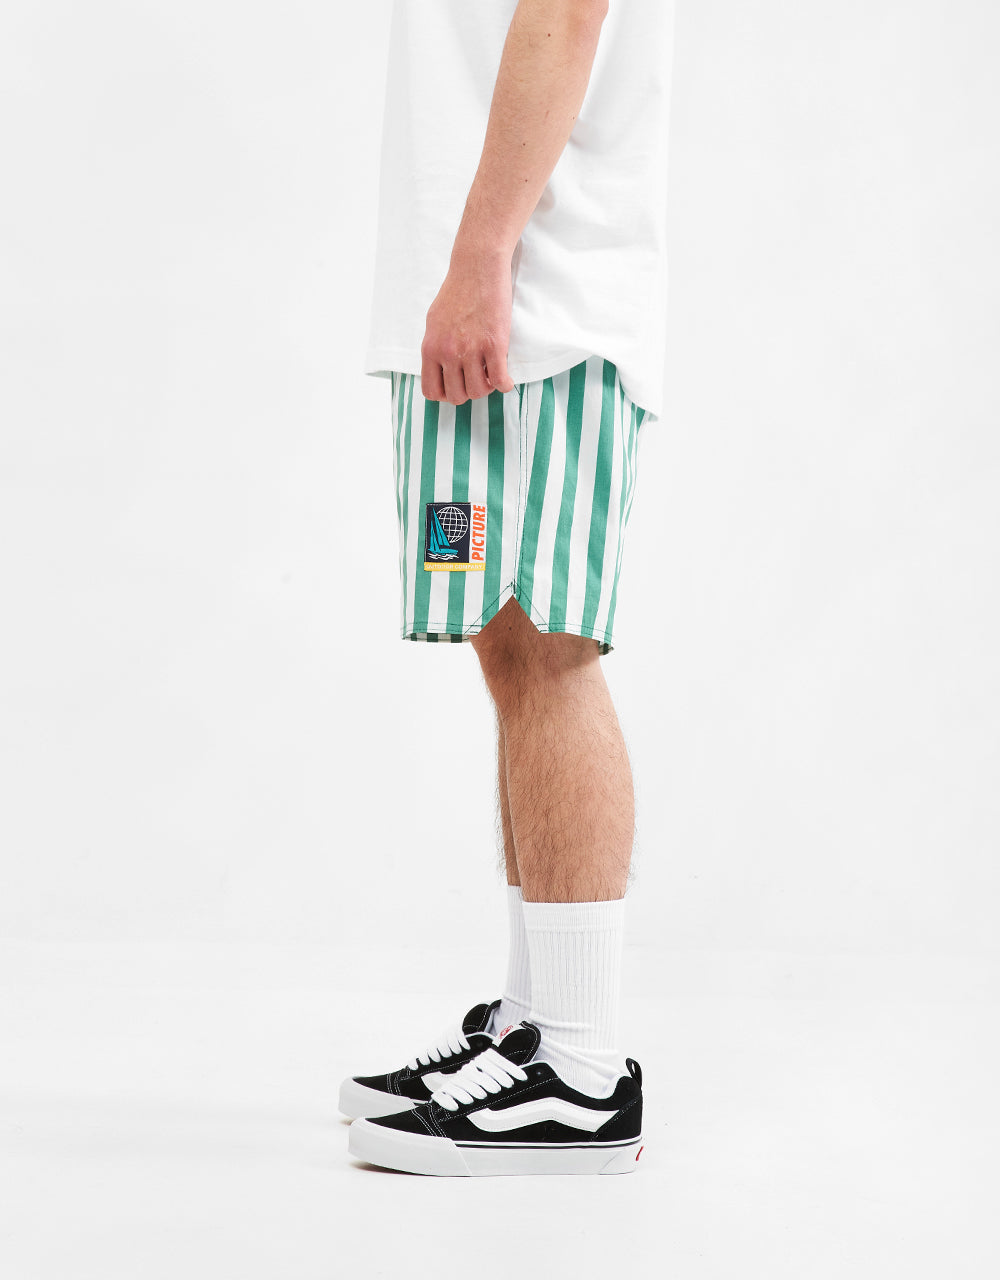 Picture Fish 17" Shorts - Lines Green Print